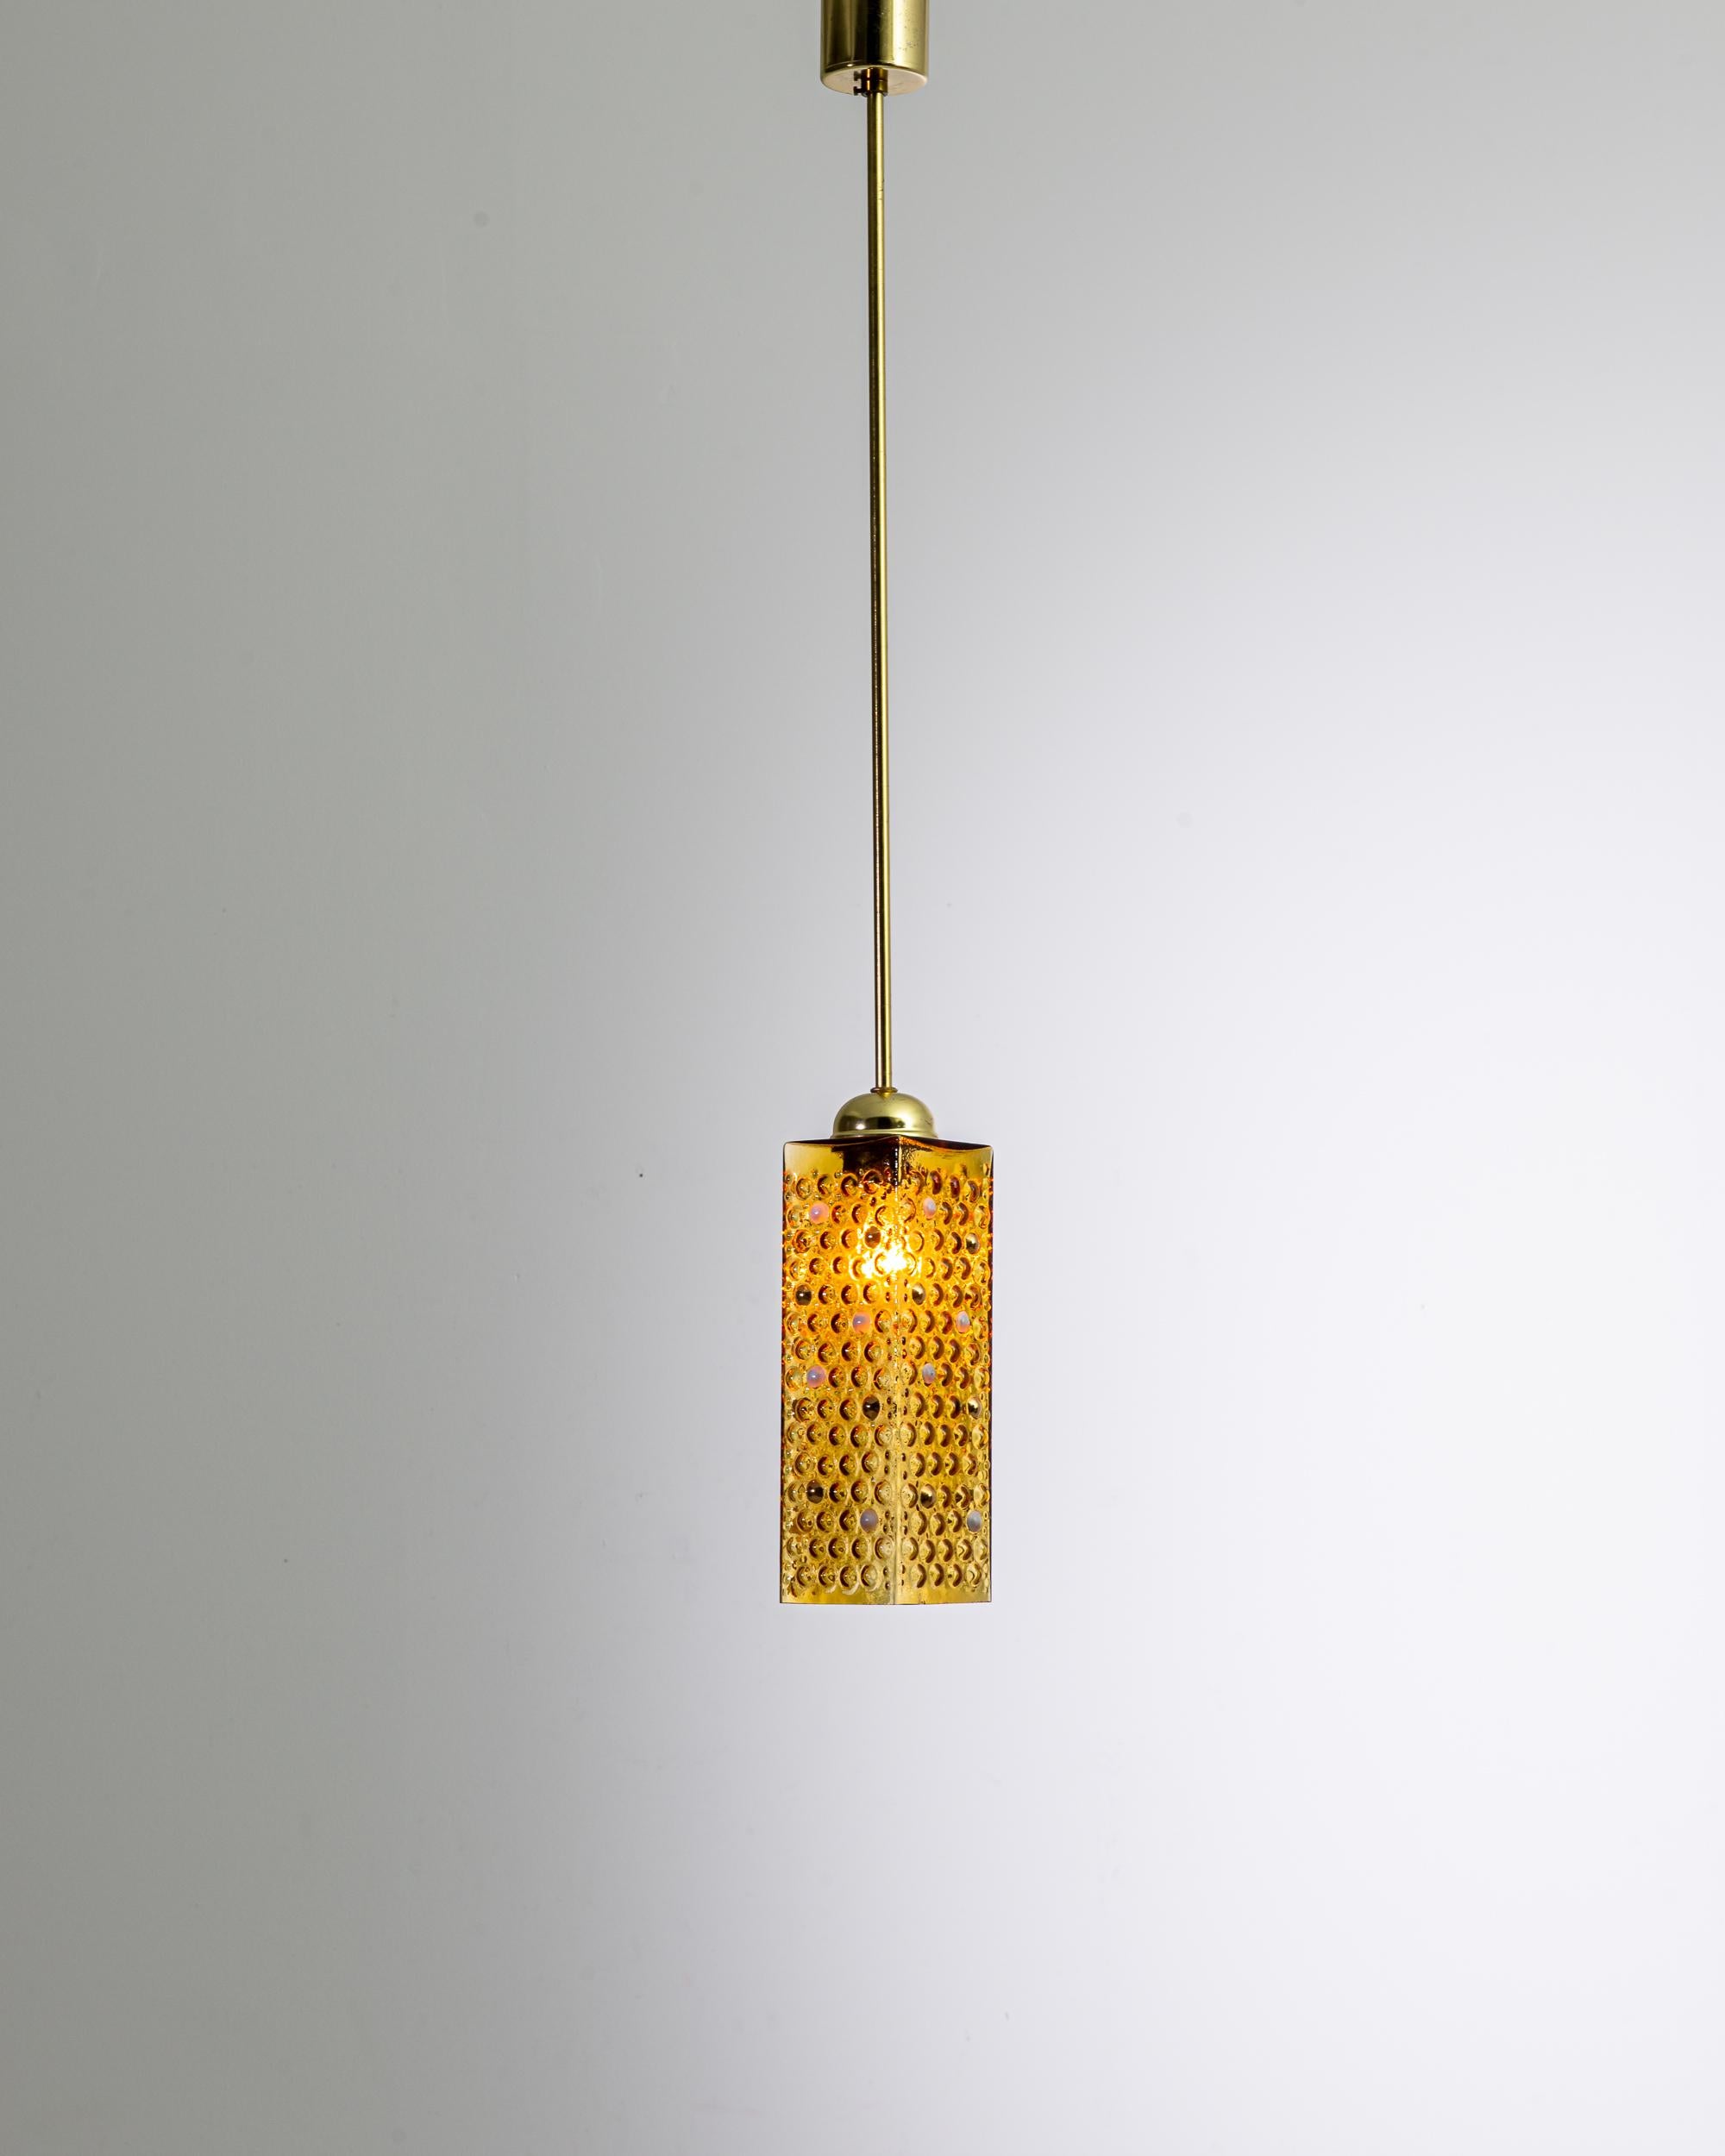 Illuminate your space with the classic sophistication of our 1960s Czech Yellow Brass and Glass Pendant Lamp. This striking piece embodies the innovation of mid-century design, combining the lustrous warmth of a polished brass stem with the textured